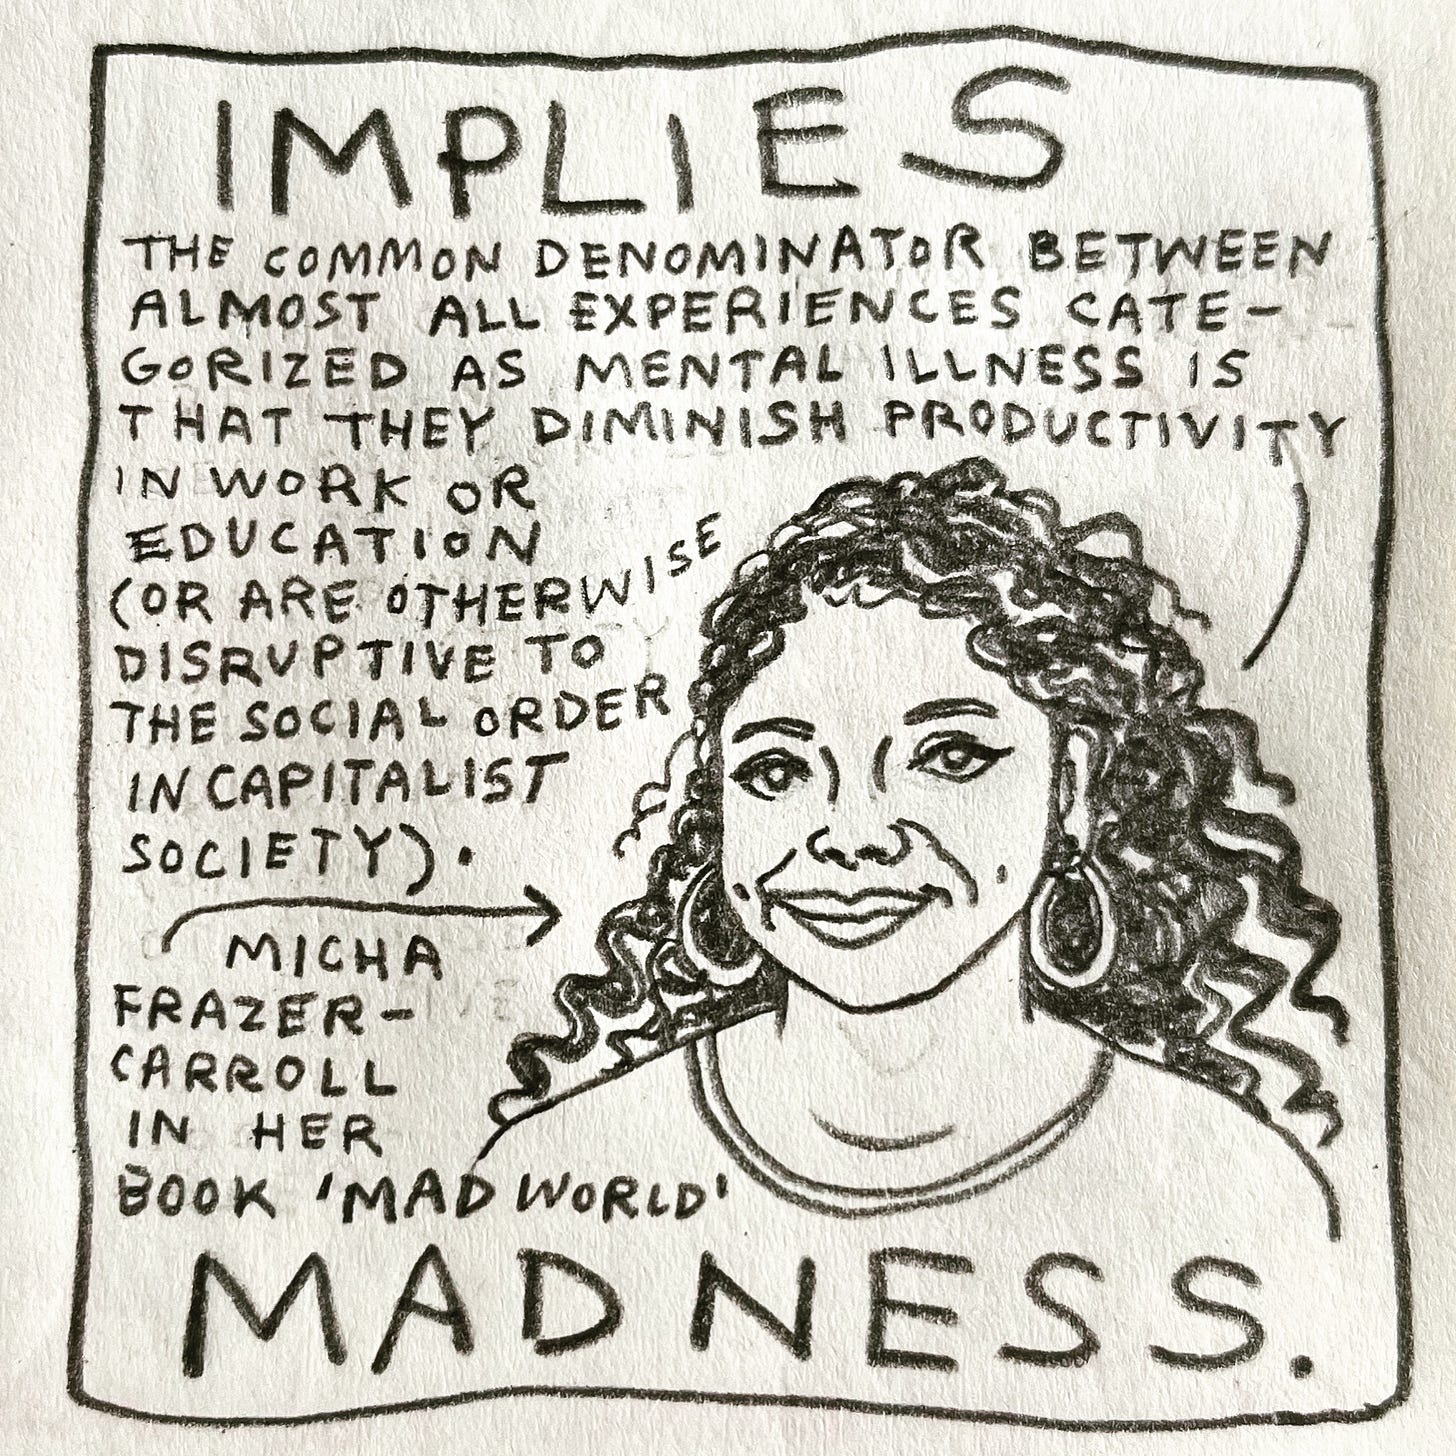 Panel 4: implies madness. Image: a head and shoulders portrait of a woman smiling, wearing large hoop earrings and a T-shirt. She has long, curly dark hair. She is saying, “The common denominator between almost all experiences categorized as Mental Illness is that they diminish our productivity in work or education (or are otherwise disruptive to the social order in a capitalist society)." An arrow pointing to her is labeled: Micha Frazer-Carroll in her book “Mad World.”